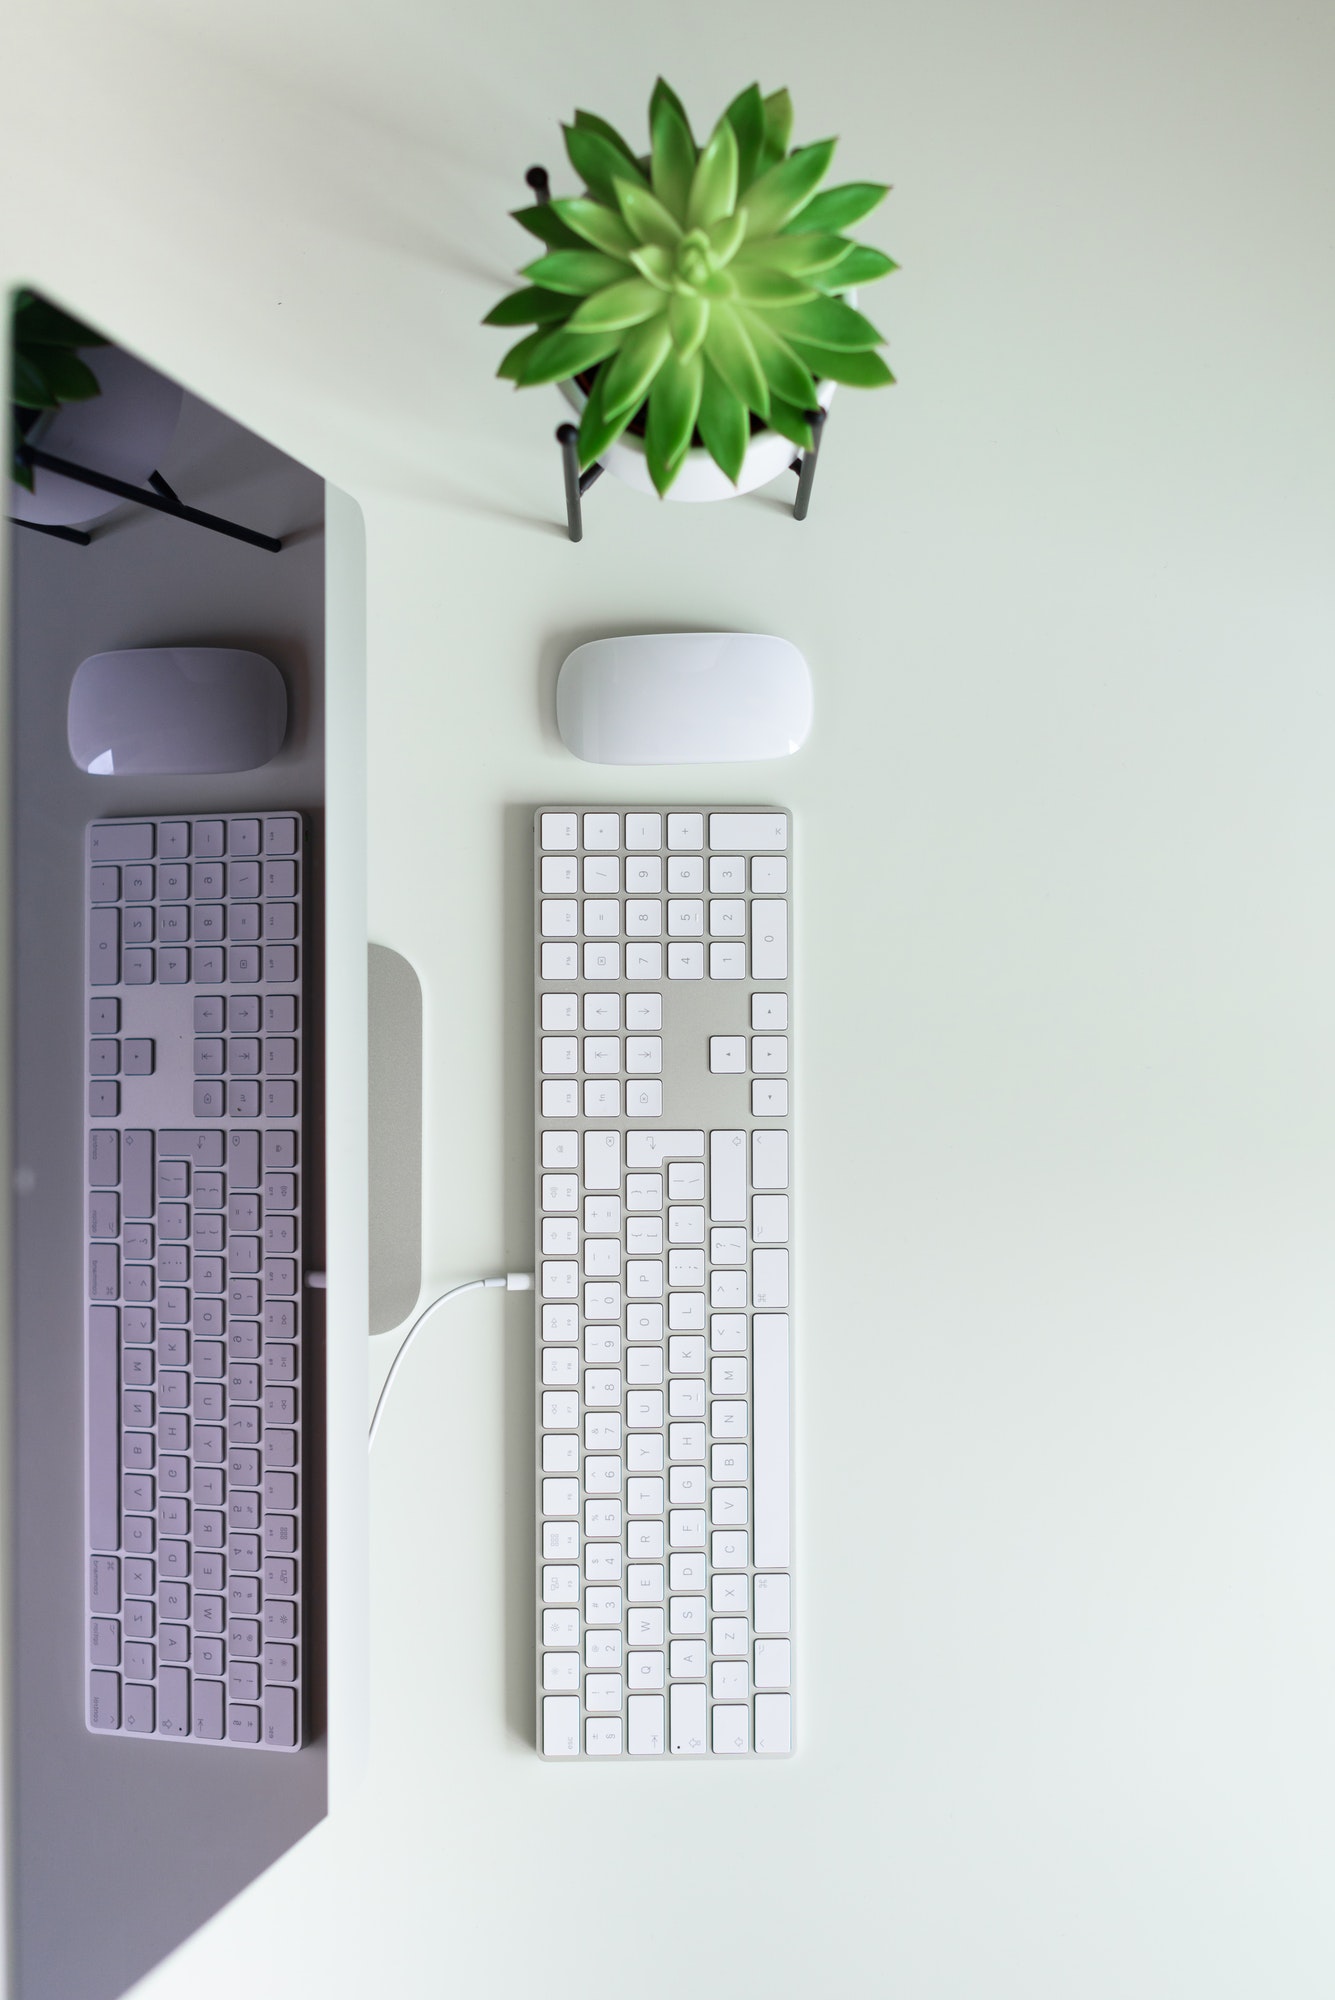 White office desk table with computer keyboard, mouse, monitor, succulent plant and other office